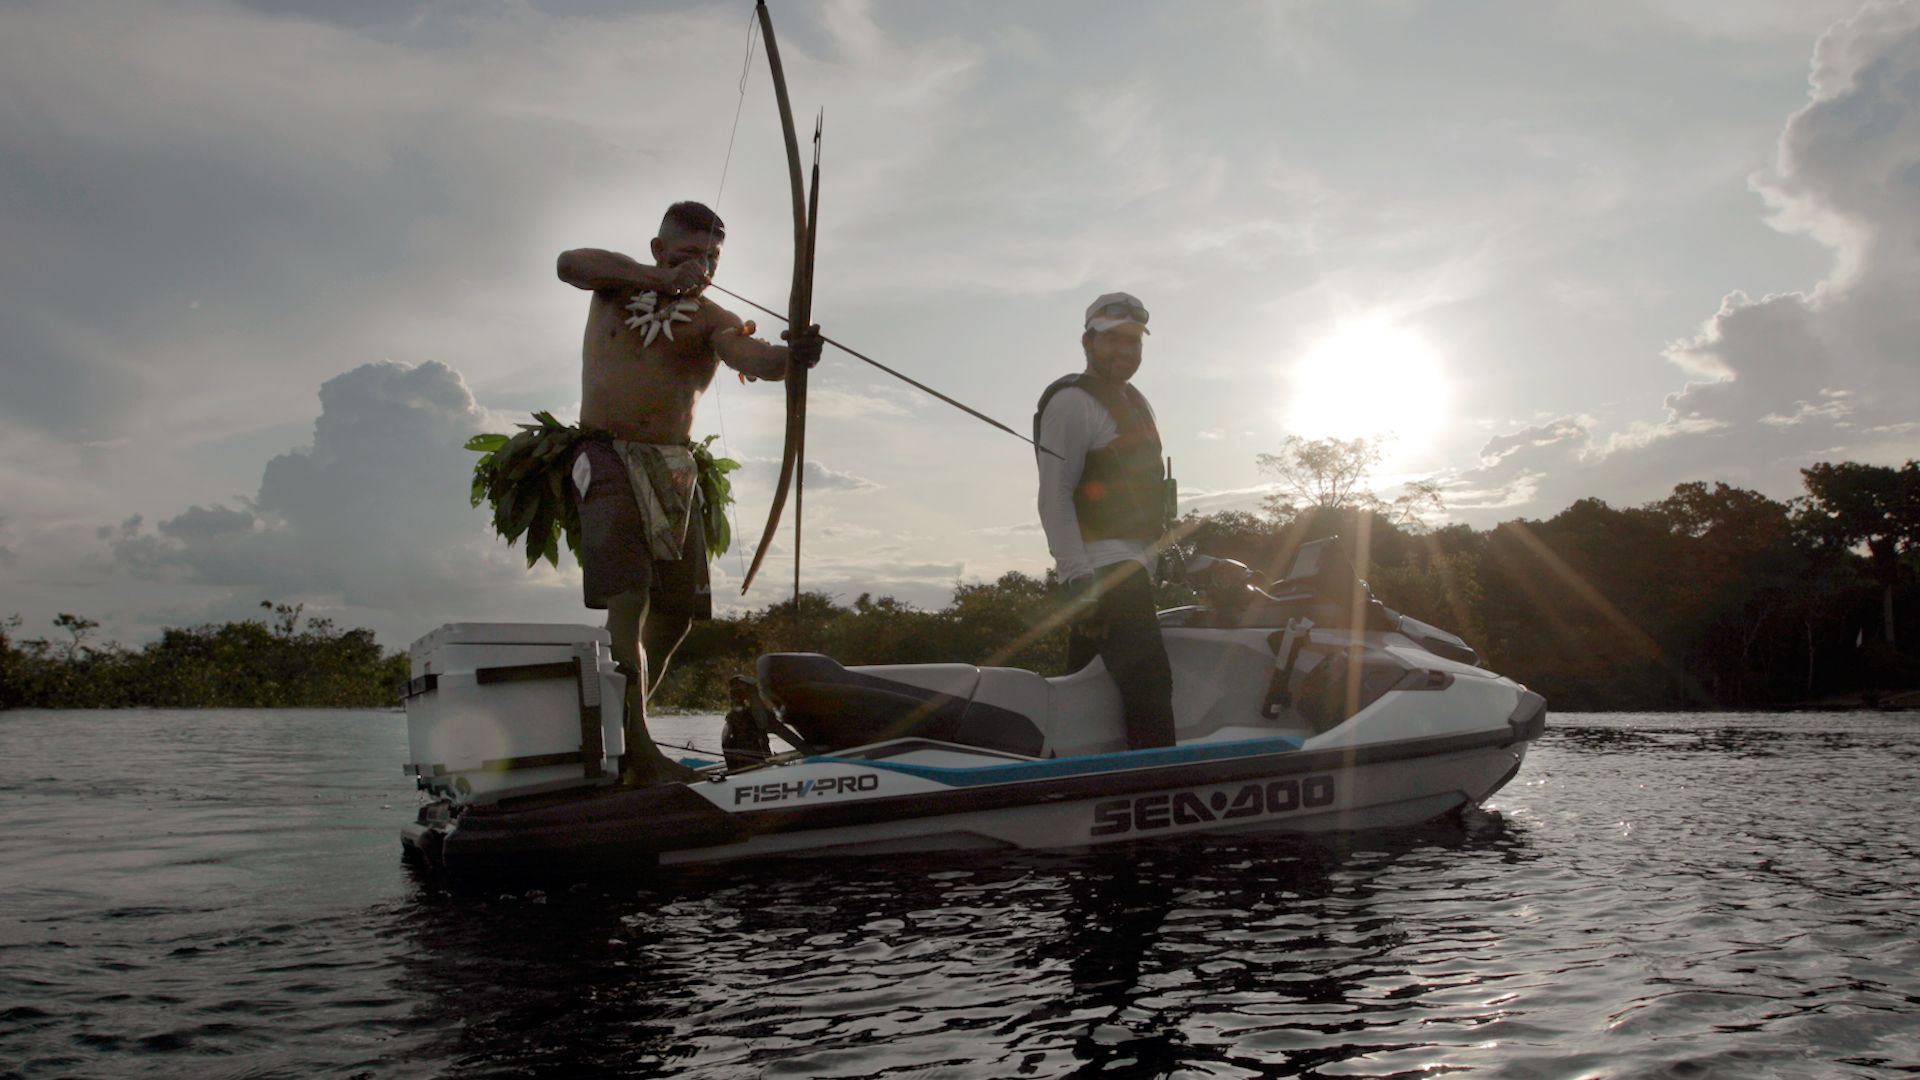 Fernando Zor on his Sea-Doo FishPro Sport with a person fishing with an arrow 